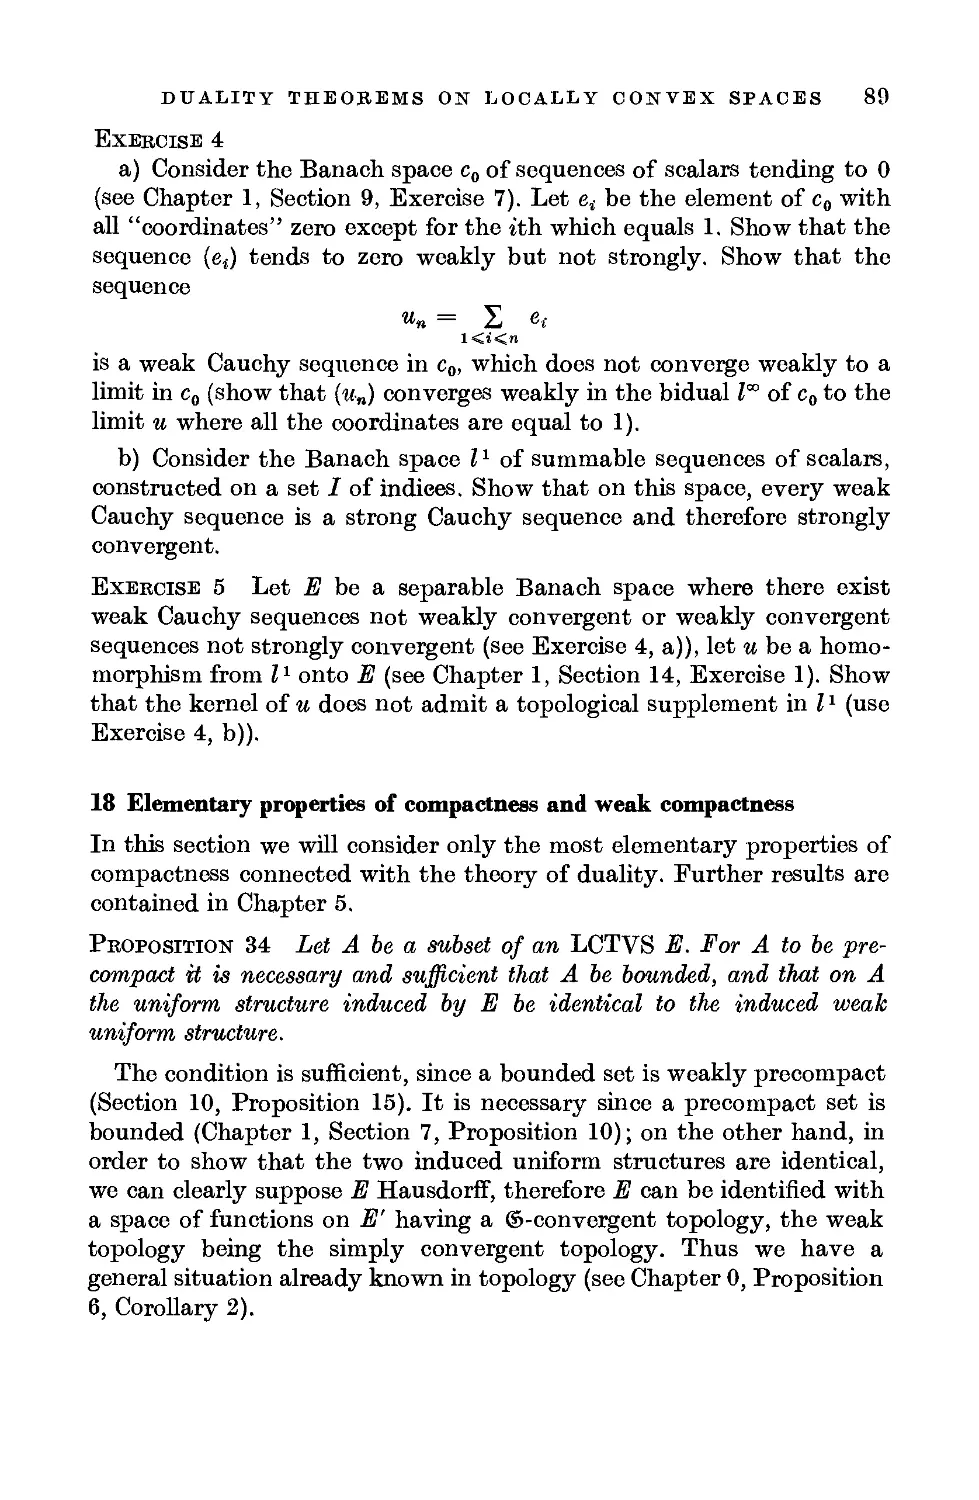 18. Elementary properties of compactness and weak compactness